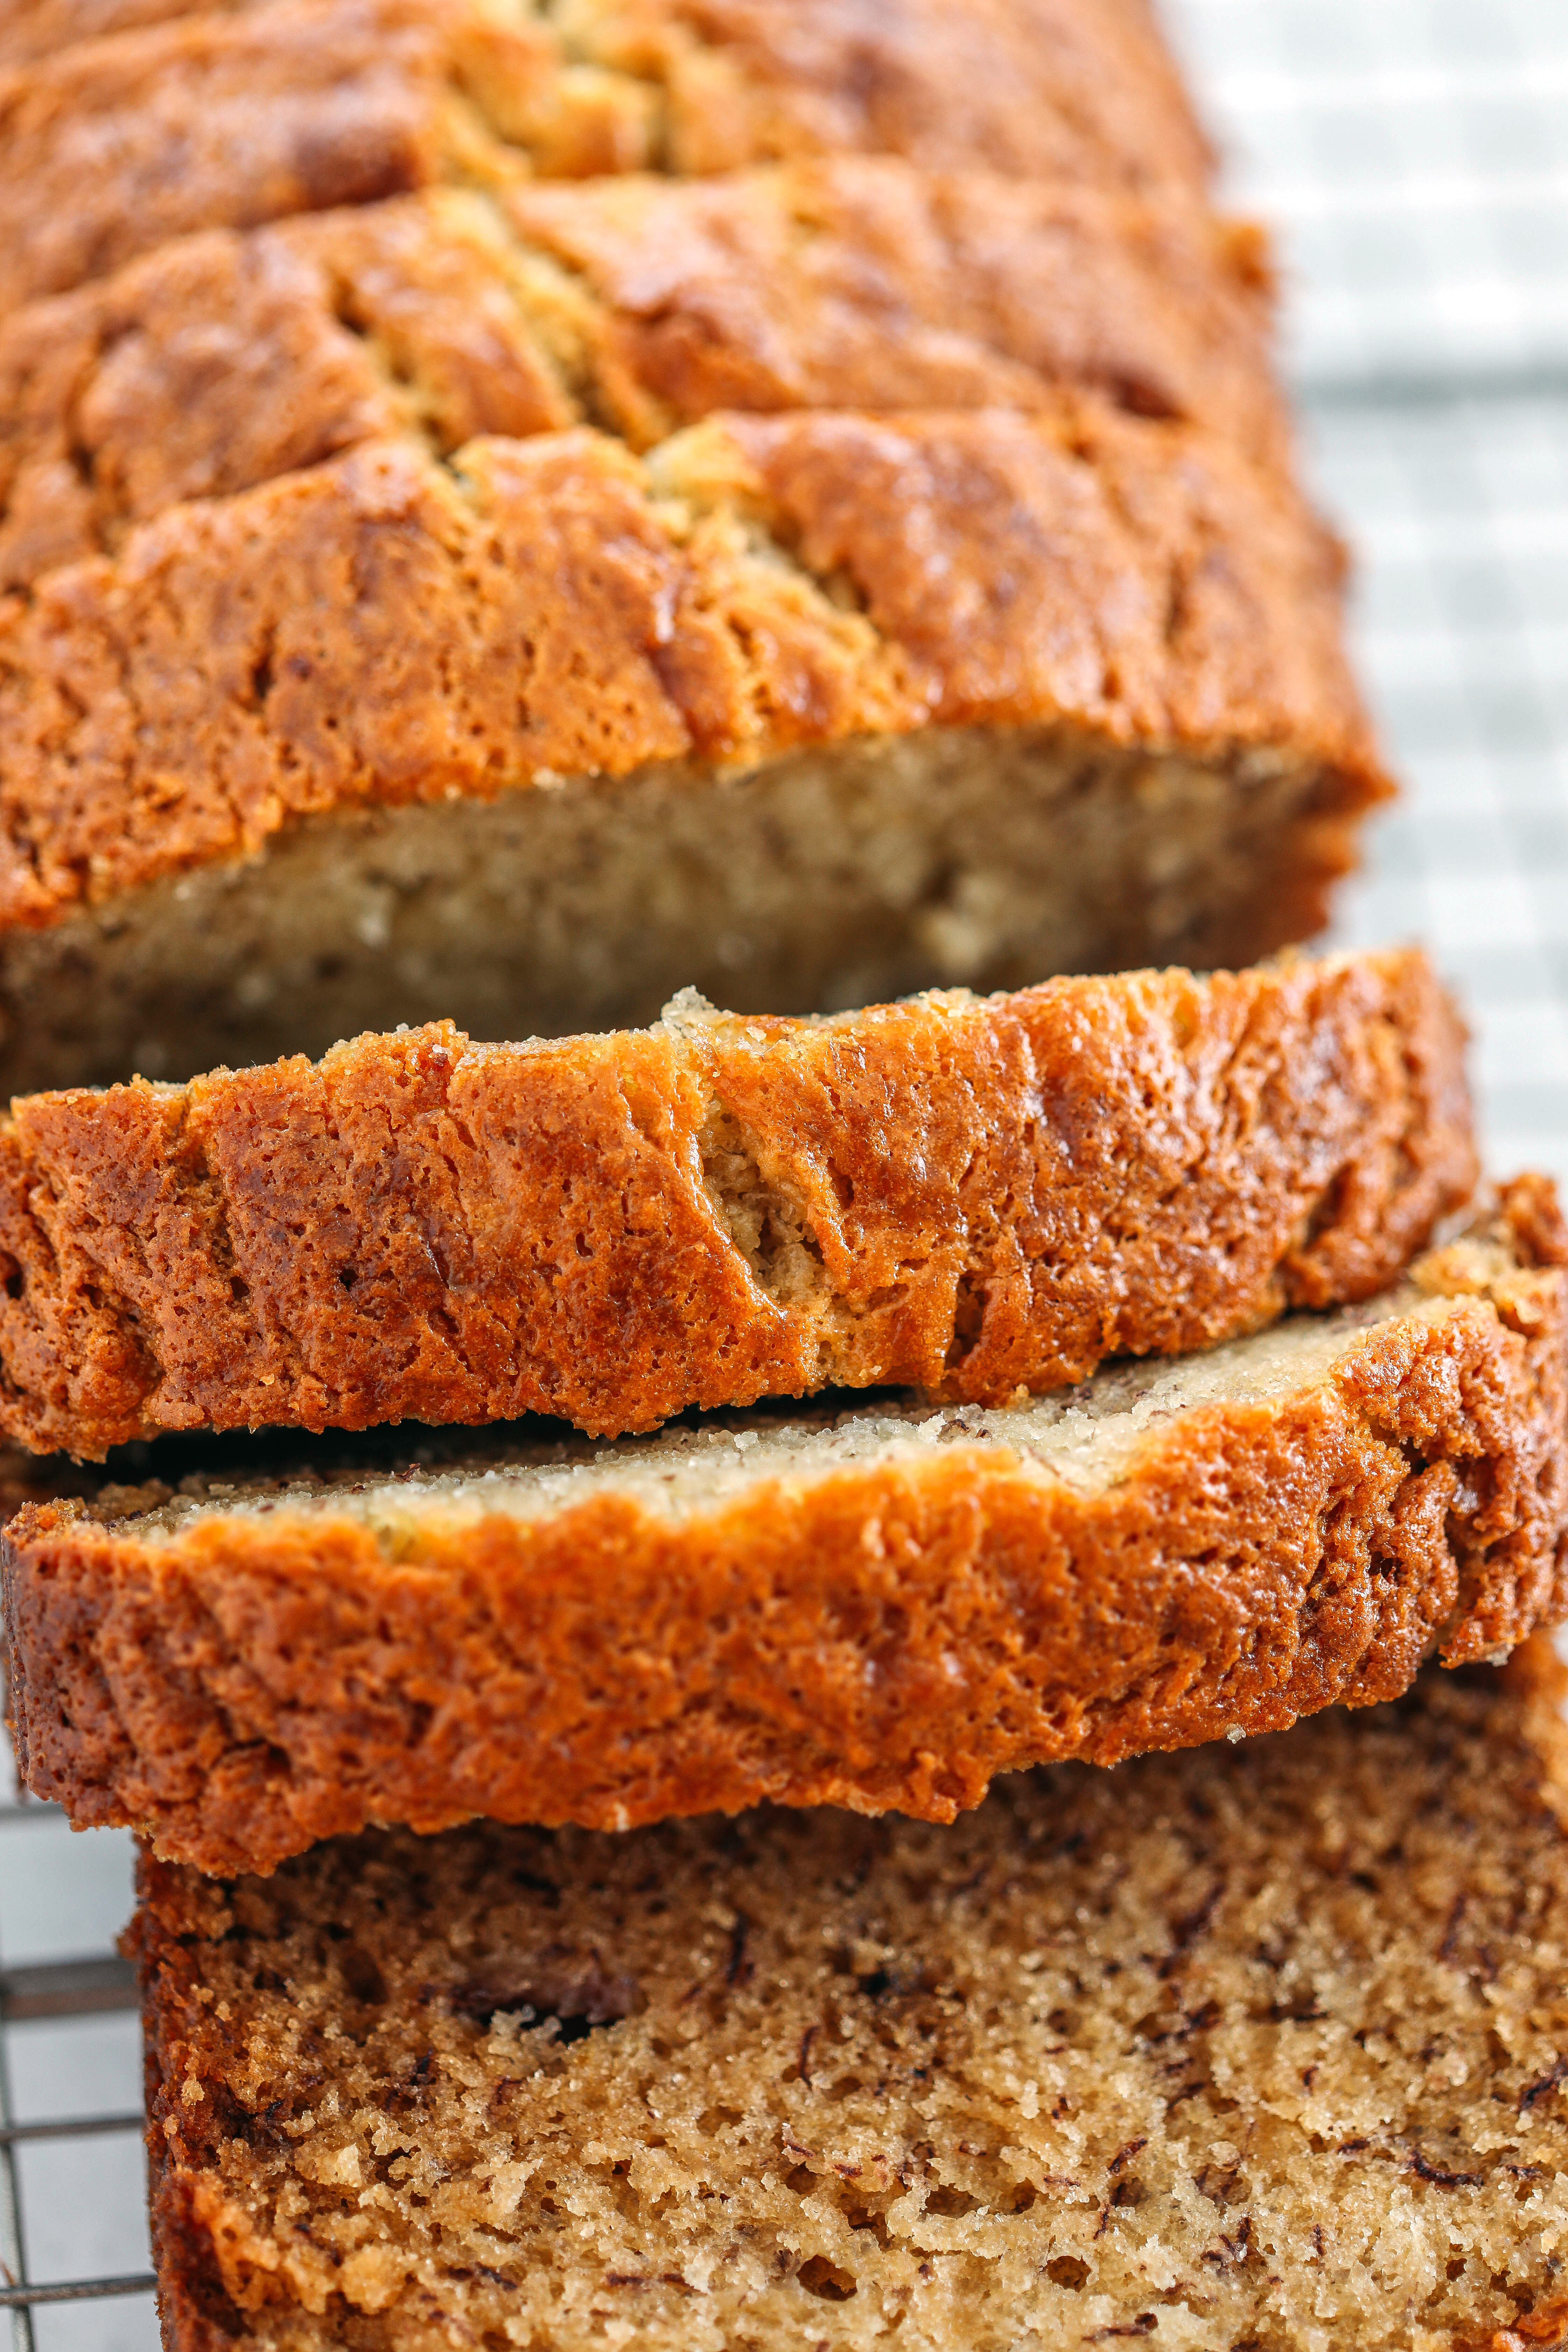 You will love my Grandma's tried and true banana bread recipe that is a classic favorite!  Perfectly sweet, moist and full of delicious banana flavor! 